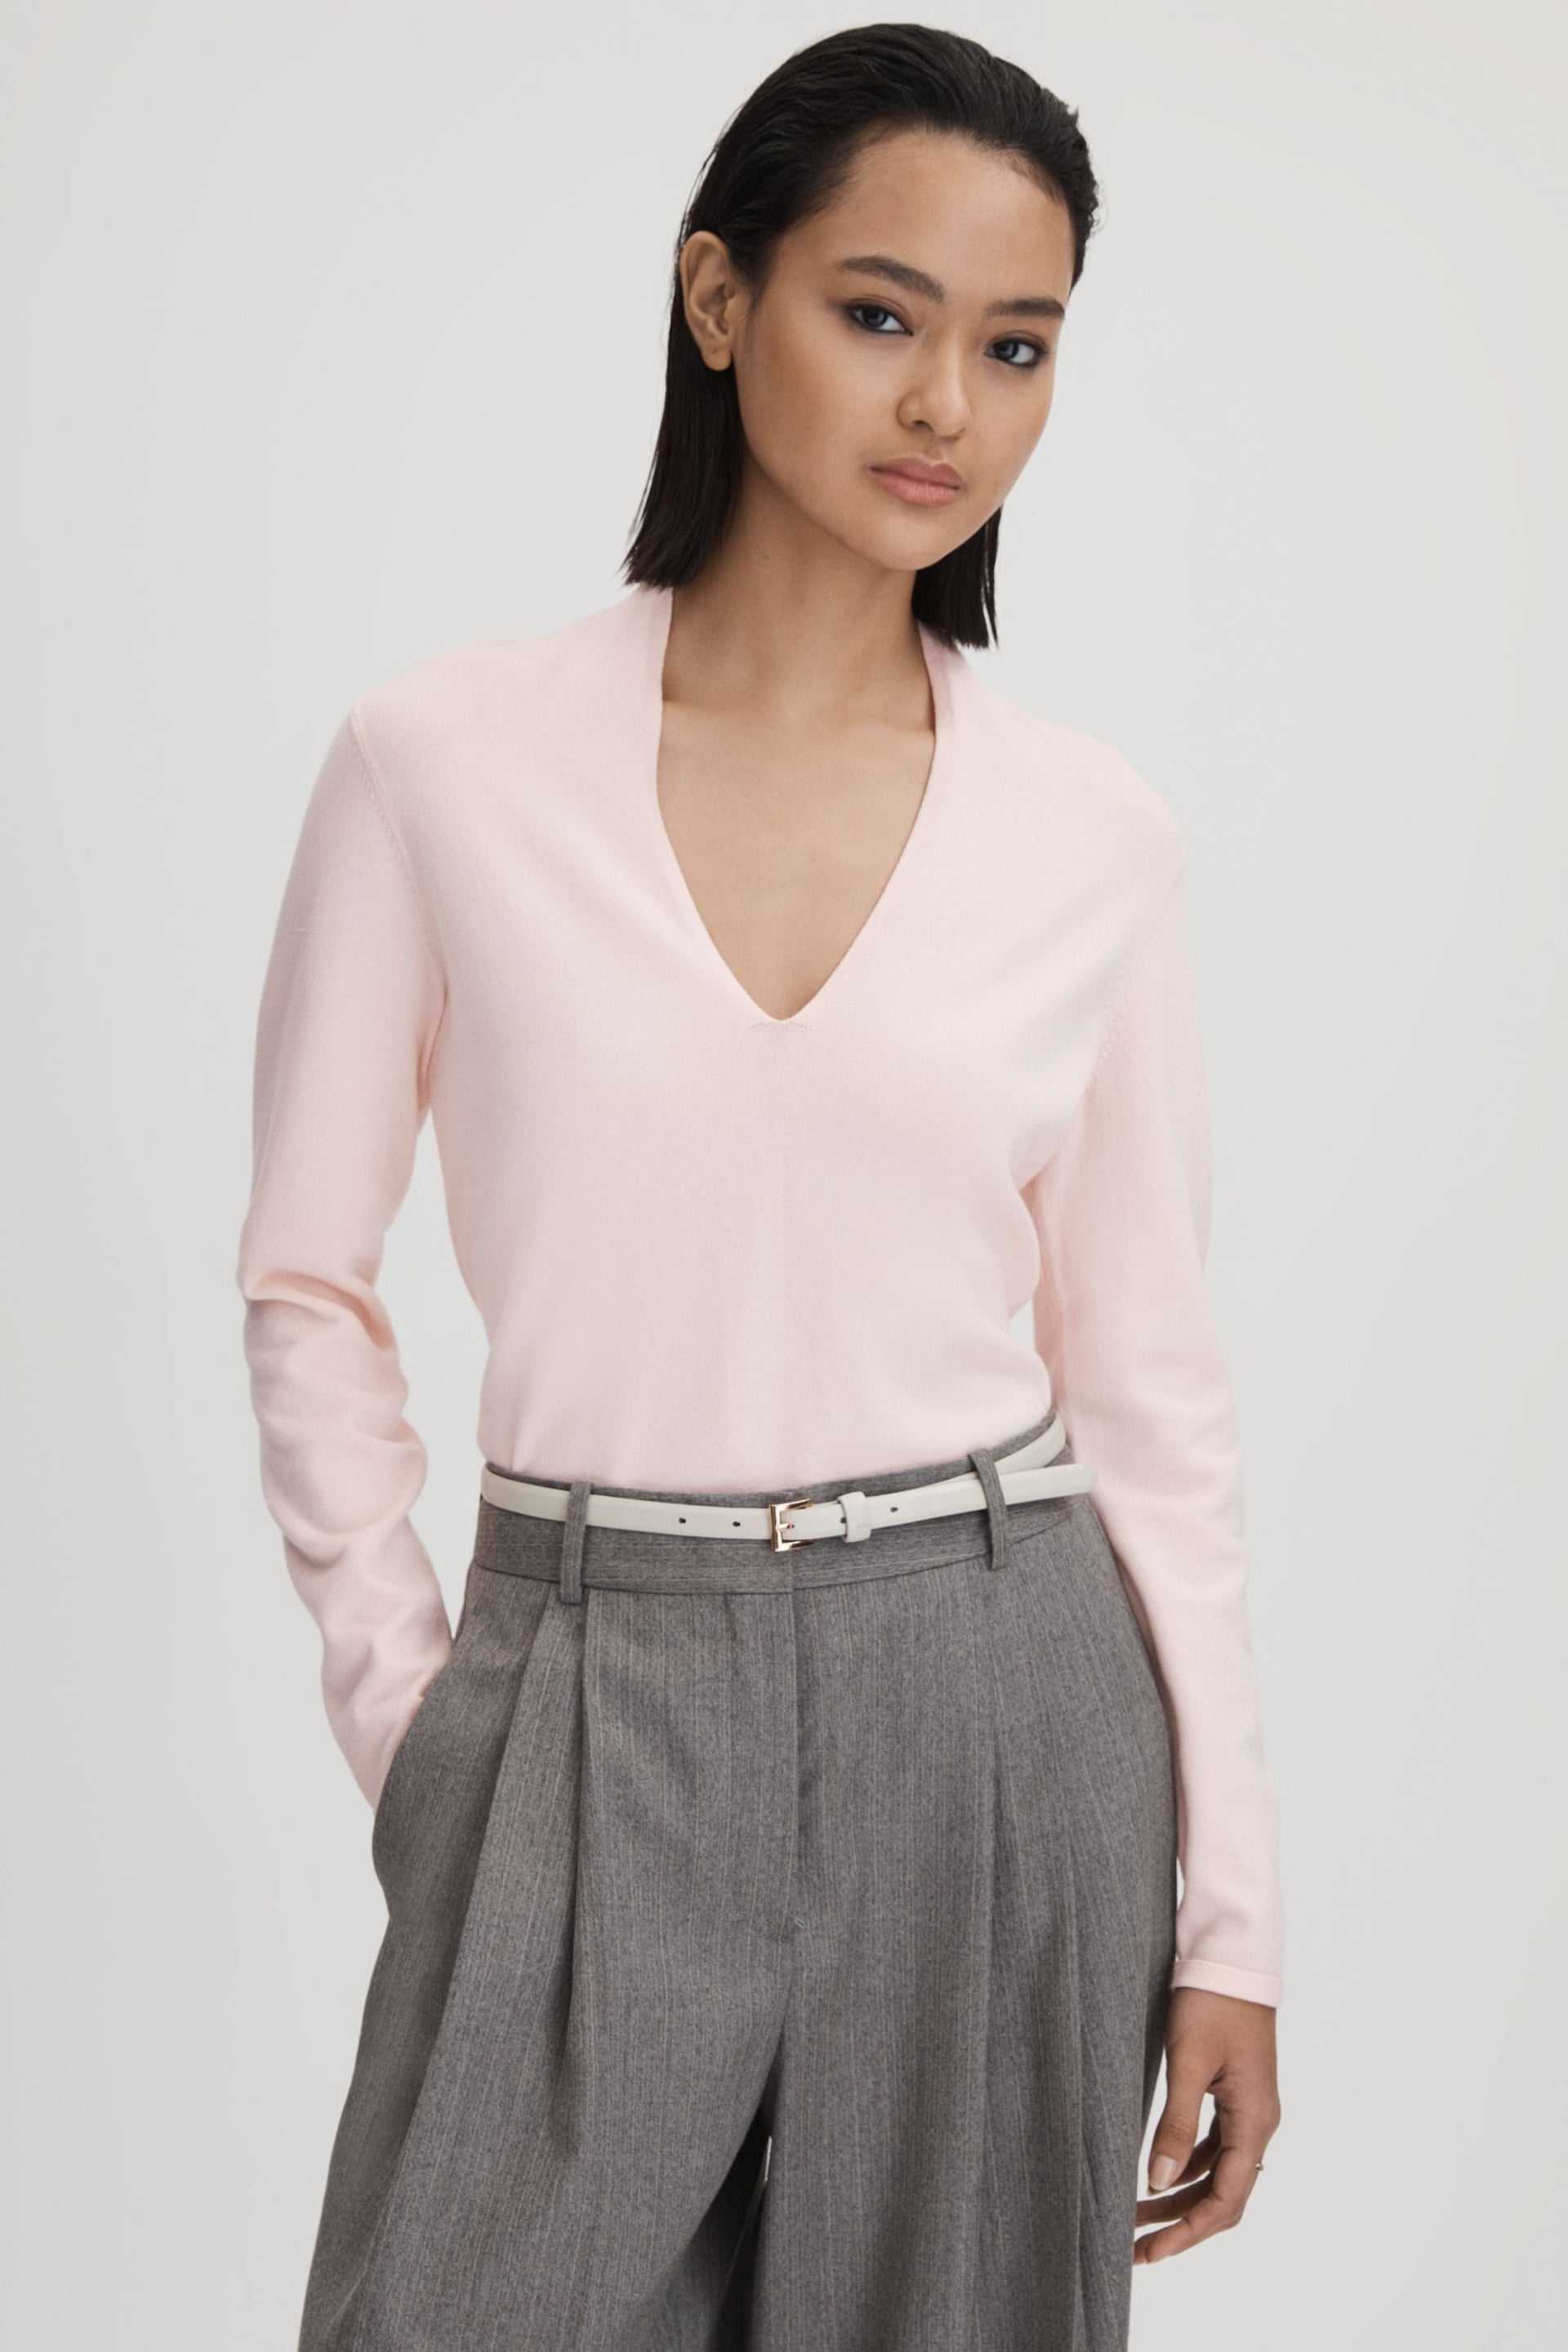 Reiss Light Pink Lina Ruche Half-Funnel Neck Top - Image 1 of 5